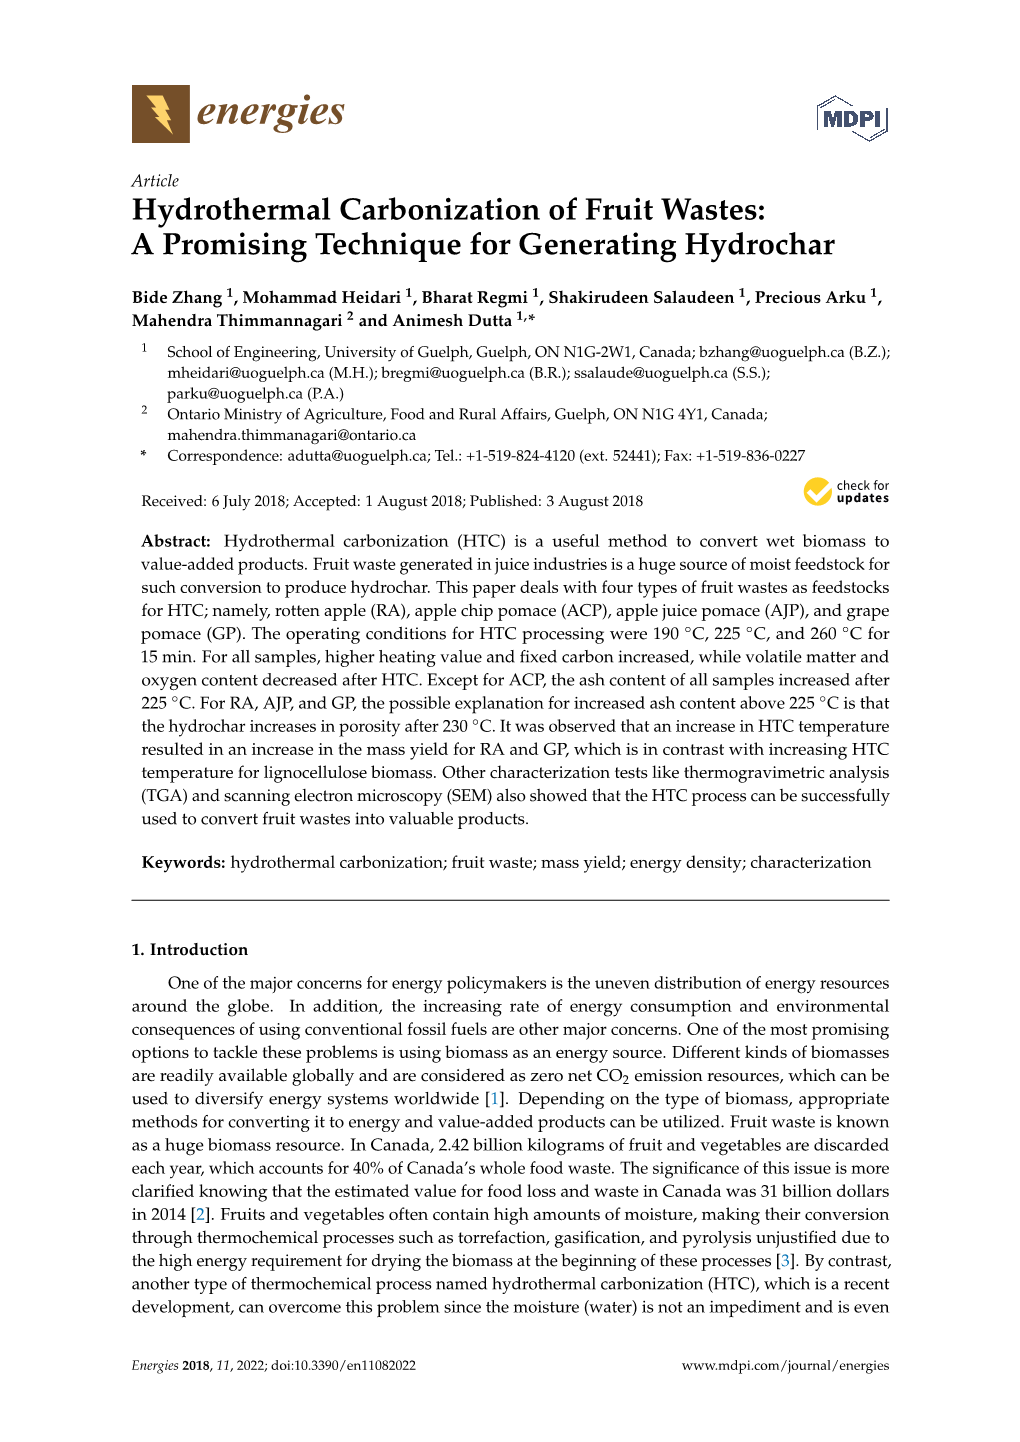 Hydrothermal Carbonization of Fruit Wastes: a Promising Technique for Generating Hydrochar